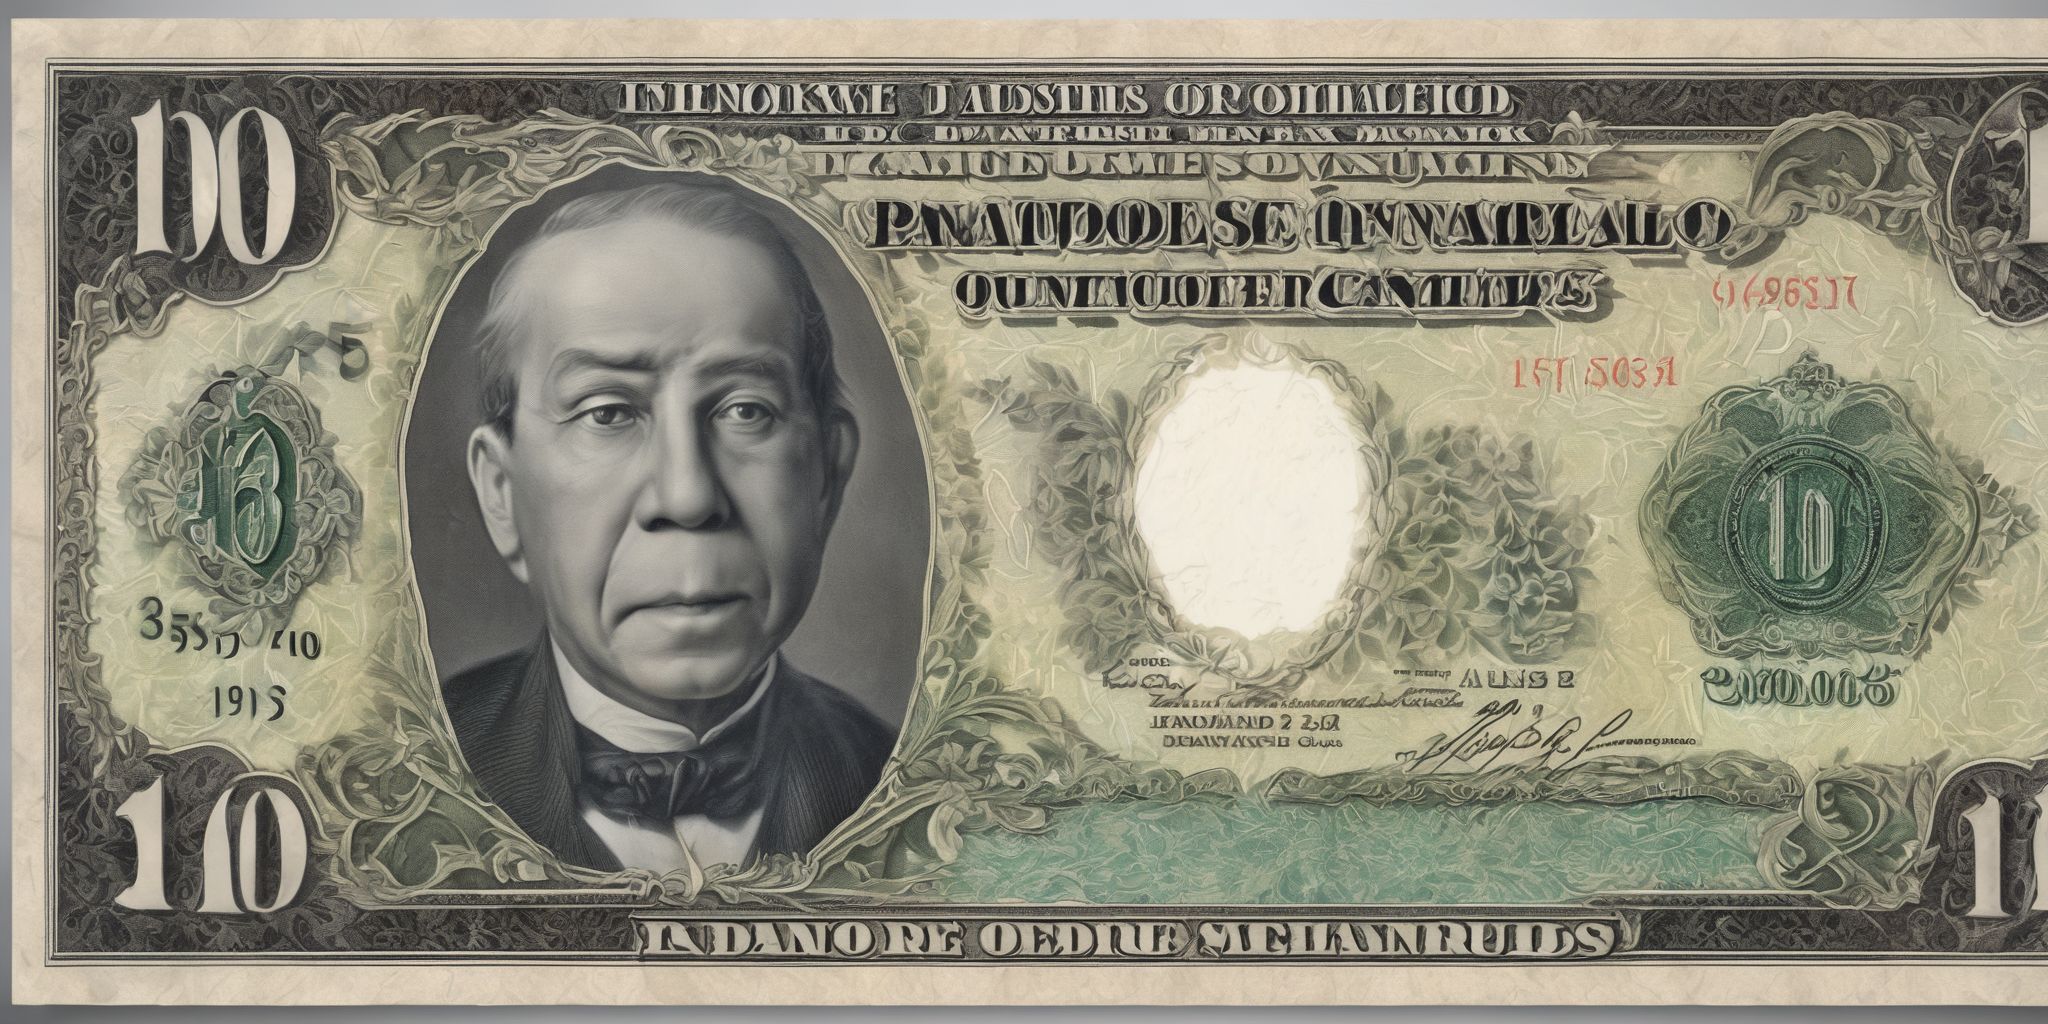 Banknote  in realistic, photographic style